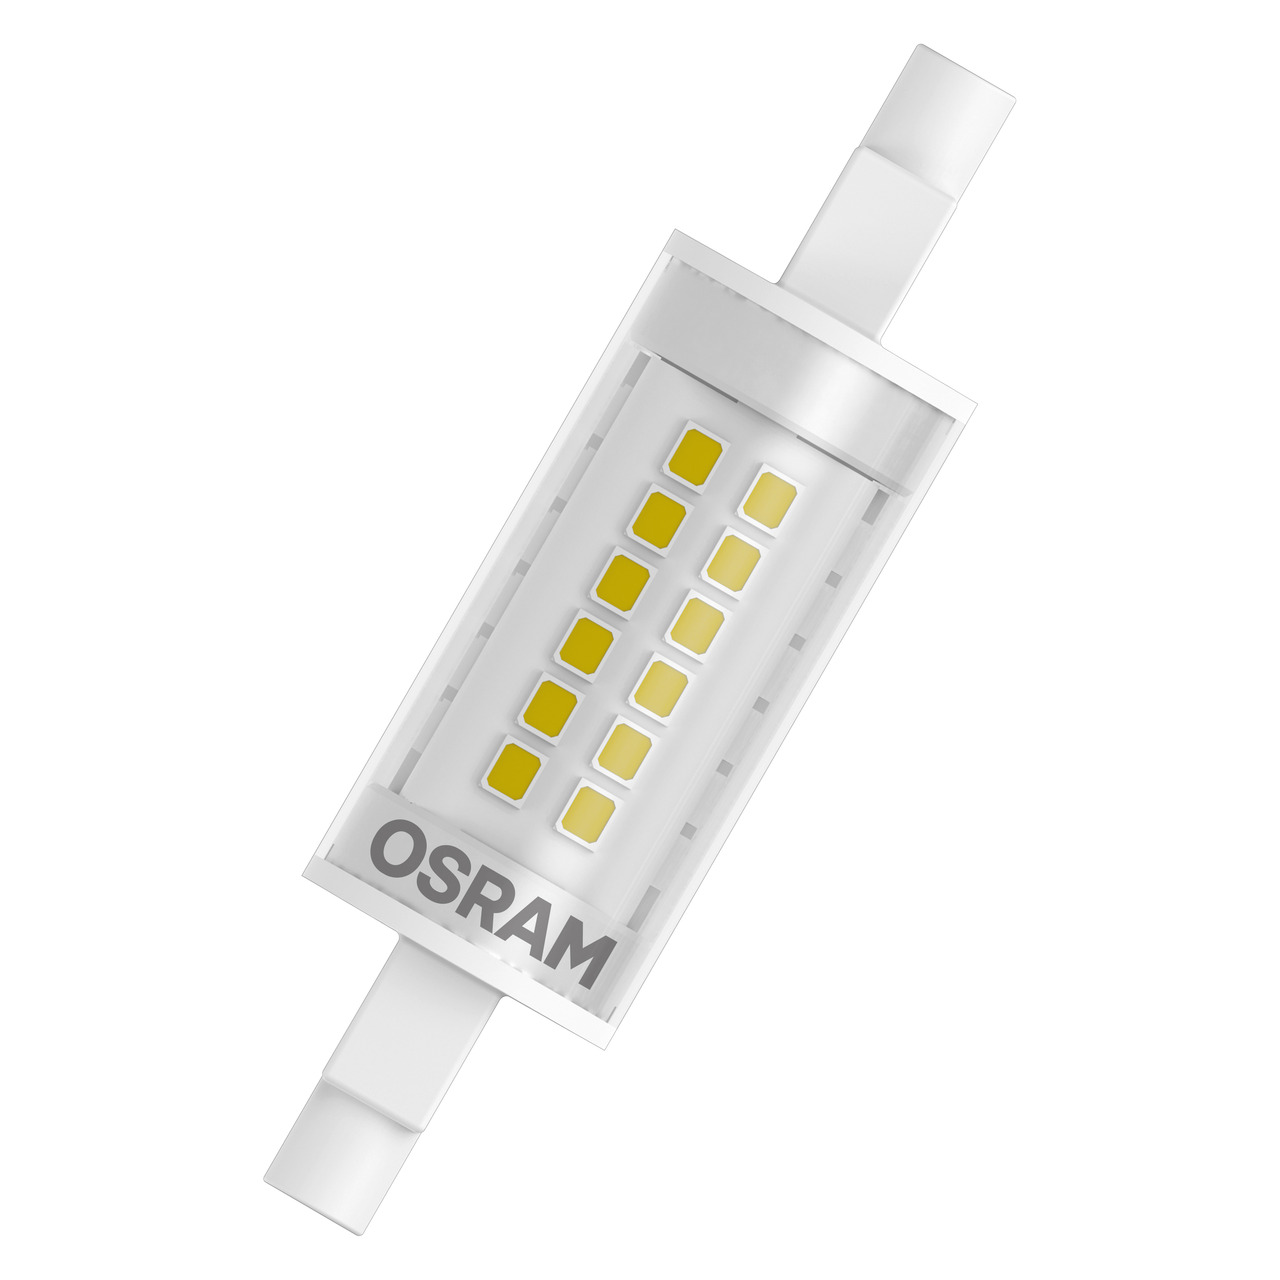 OSRAM 7-W-LED-Lampe T20- R7s- 806 lm- warmweiss